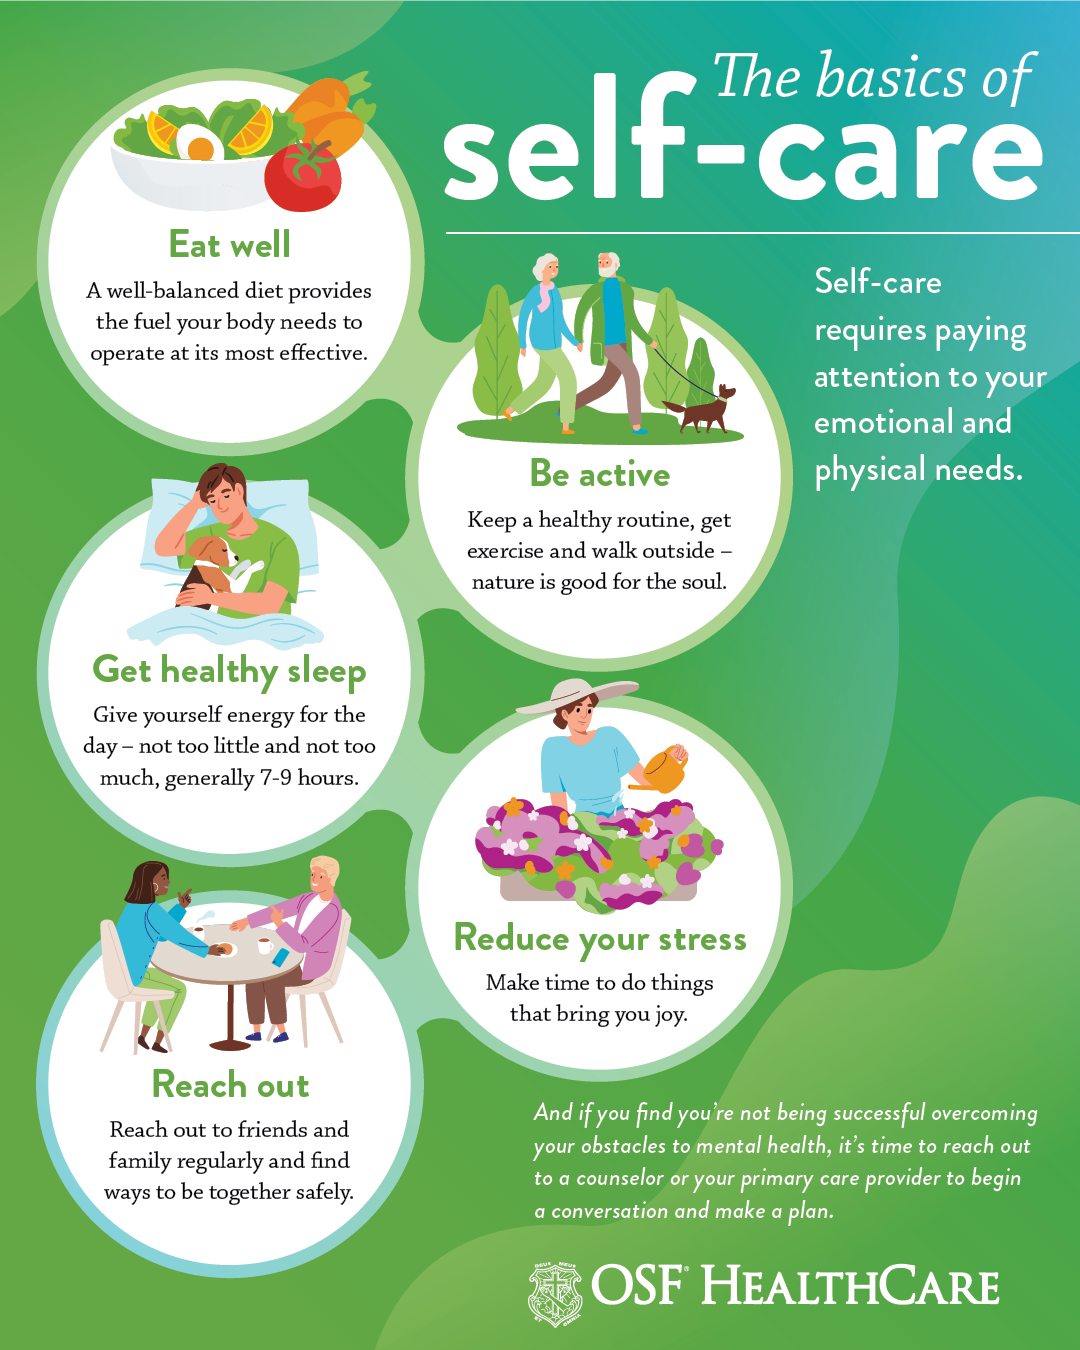 Which of the following is a good example of self-care?